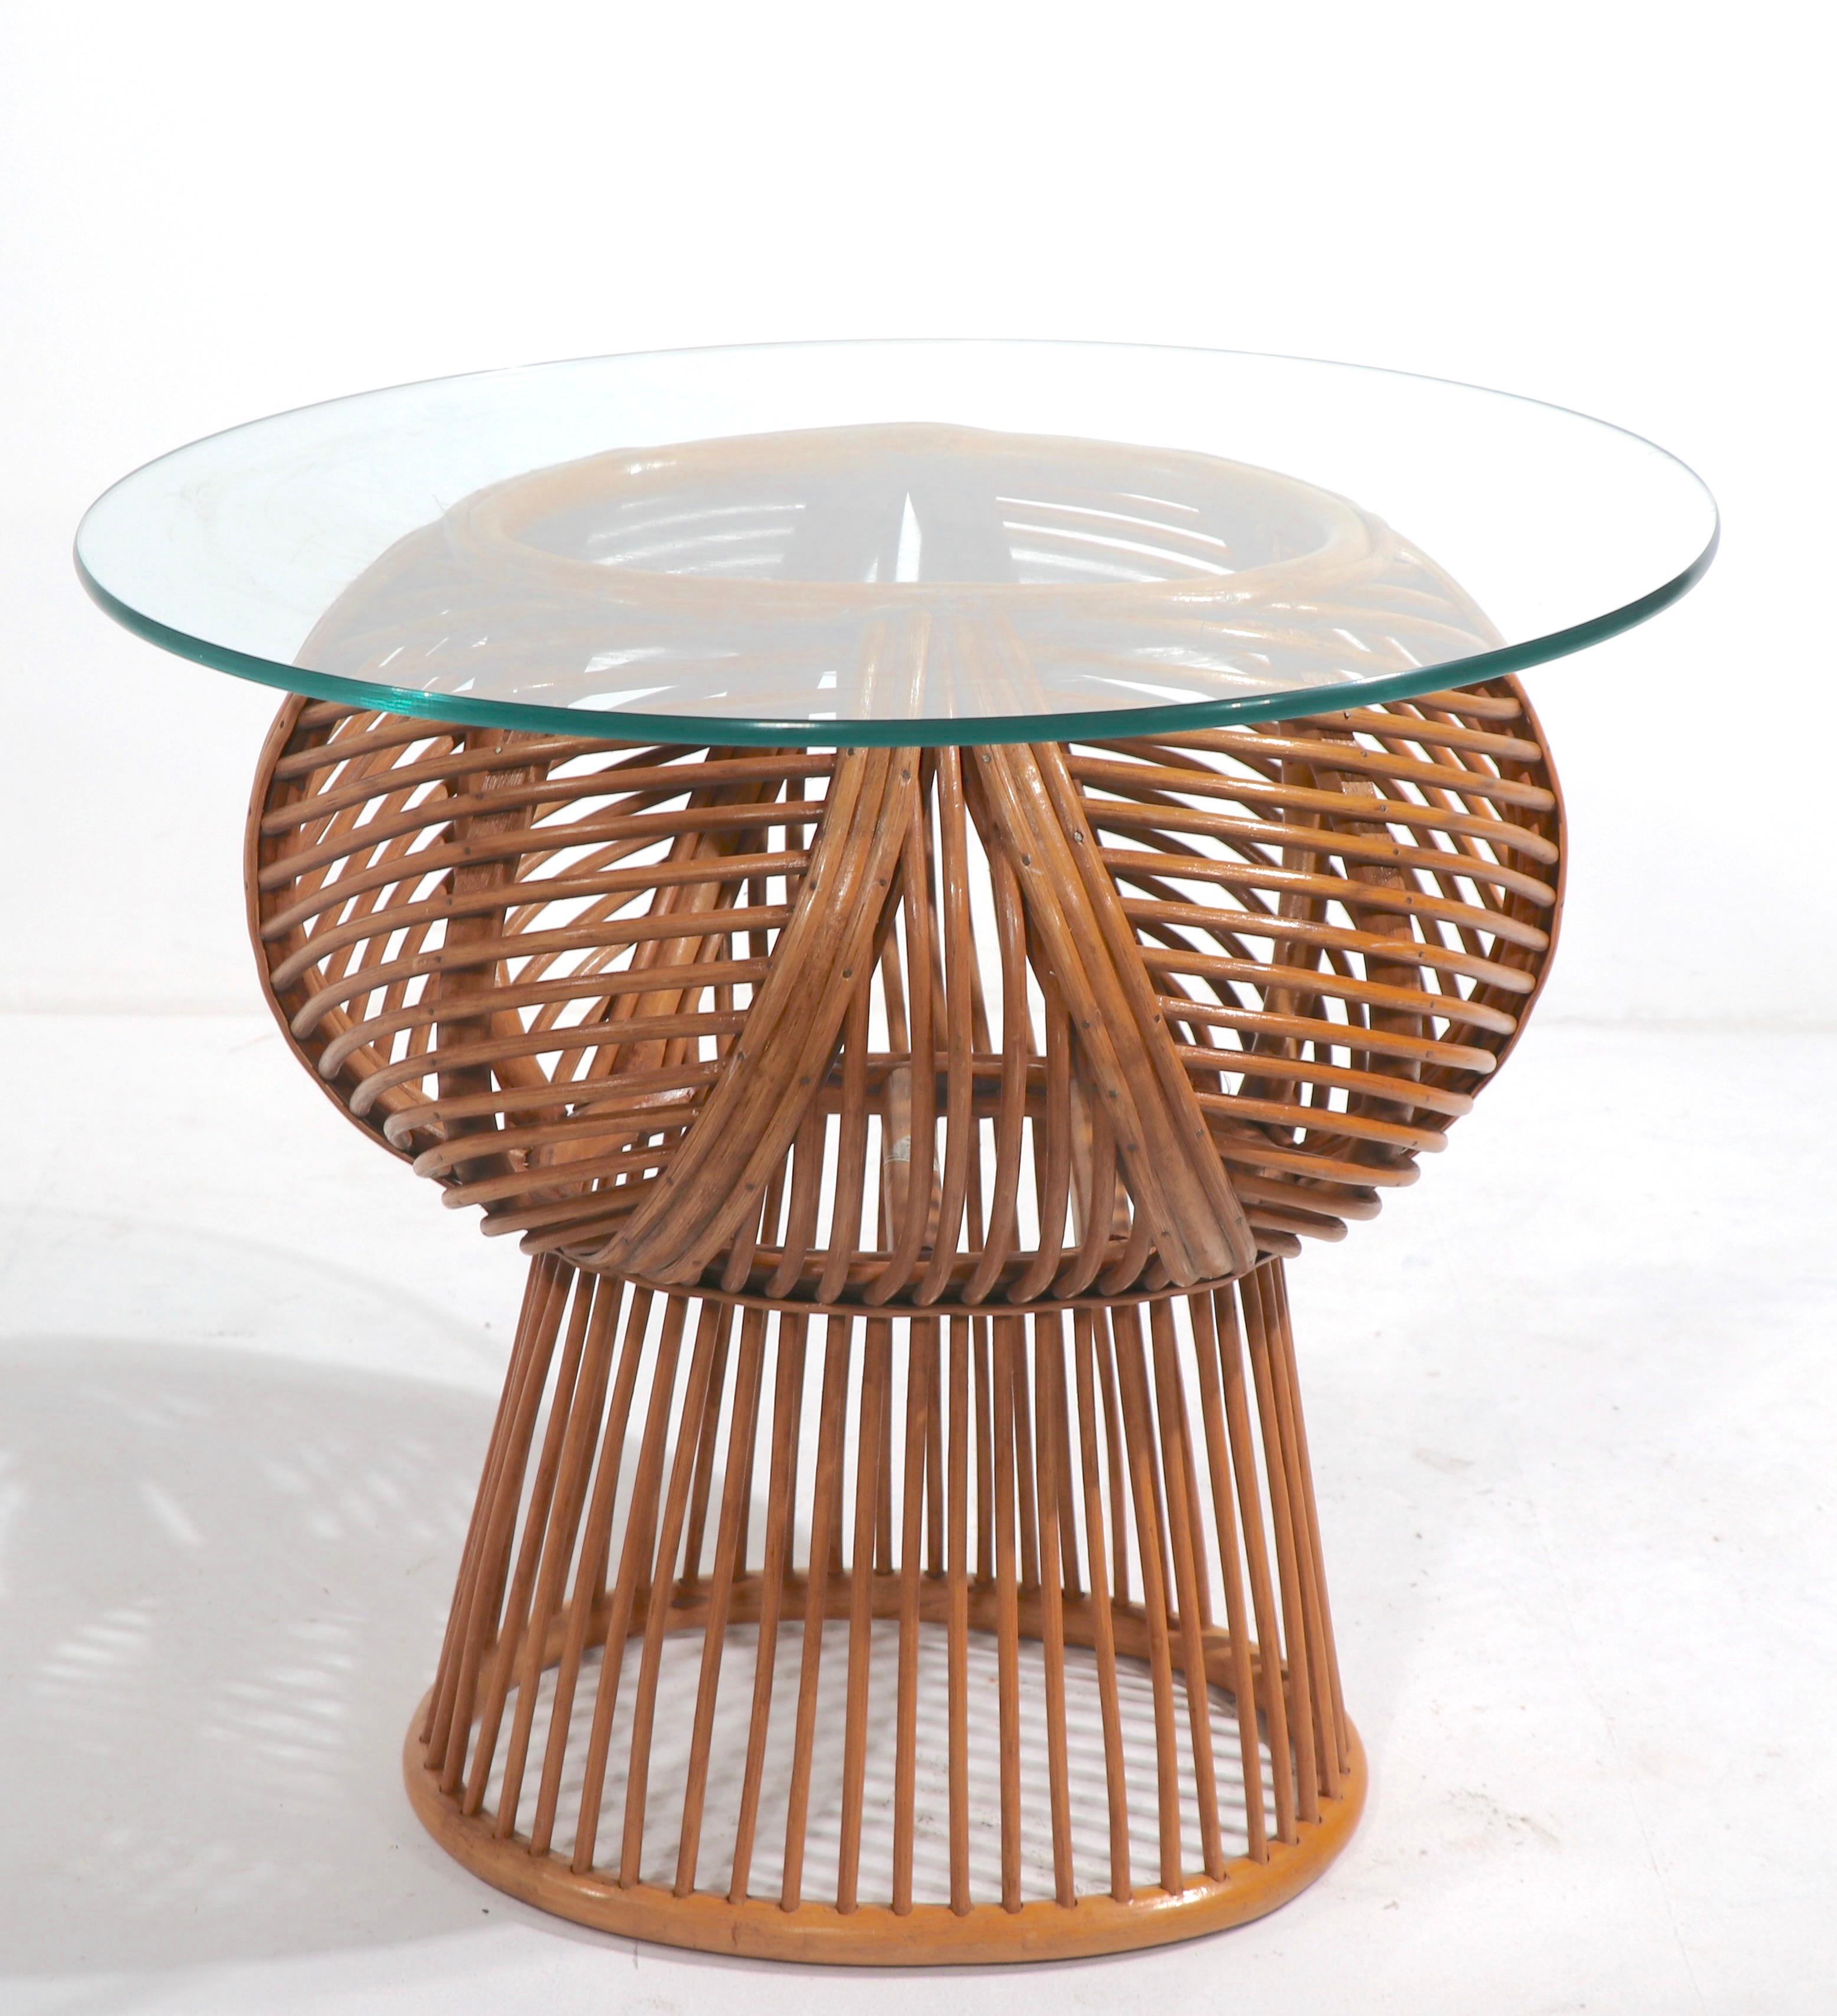 Stylish and chic wicker base, glass top occasional table, wicker retains original made in Philippines label. Very fine condition, clean and ready to use.